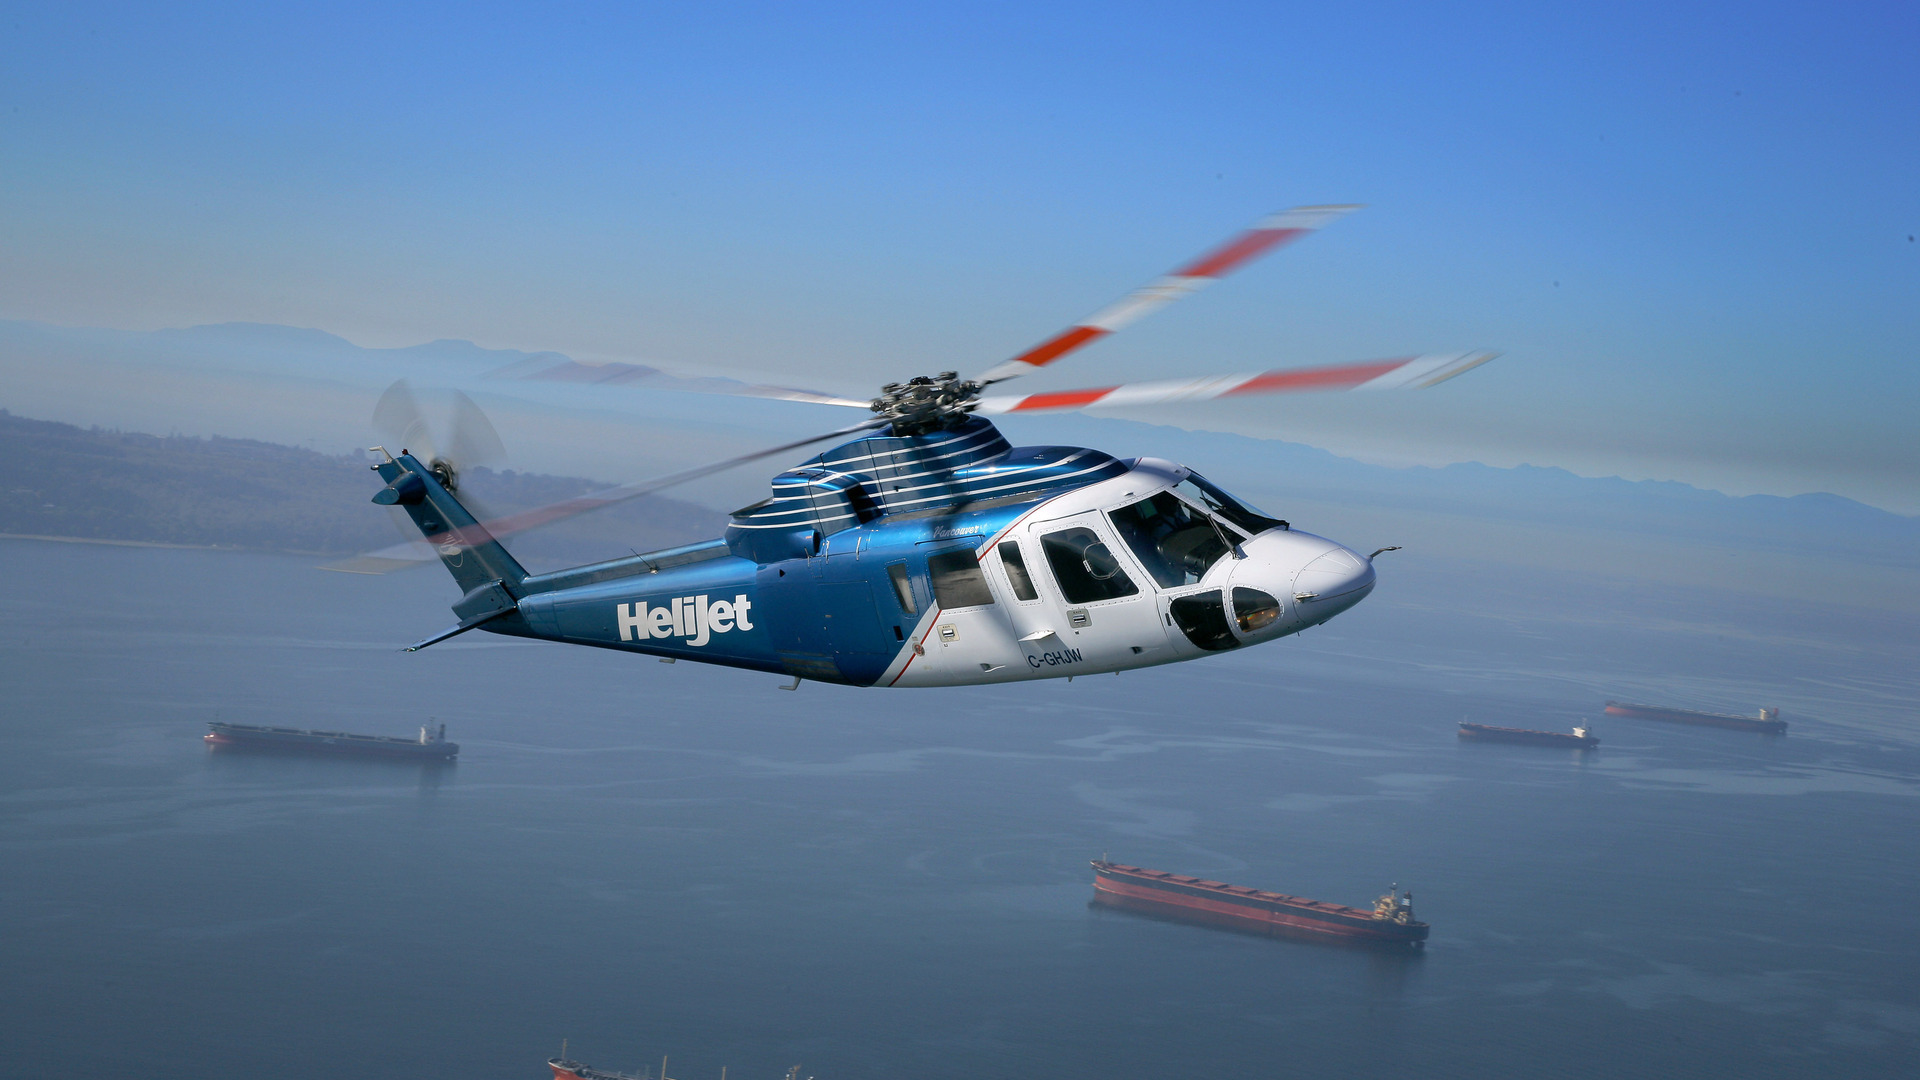 5K Helicopters Wallpaper